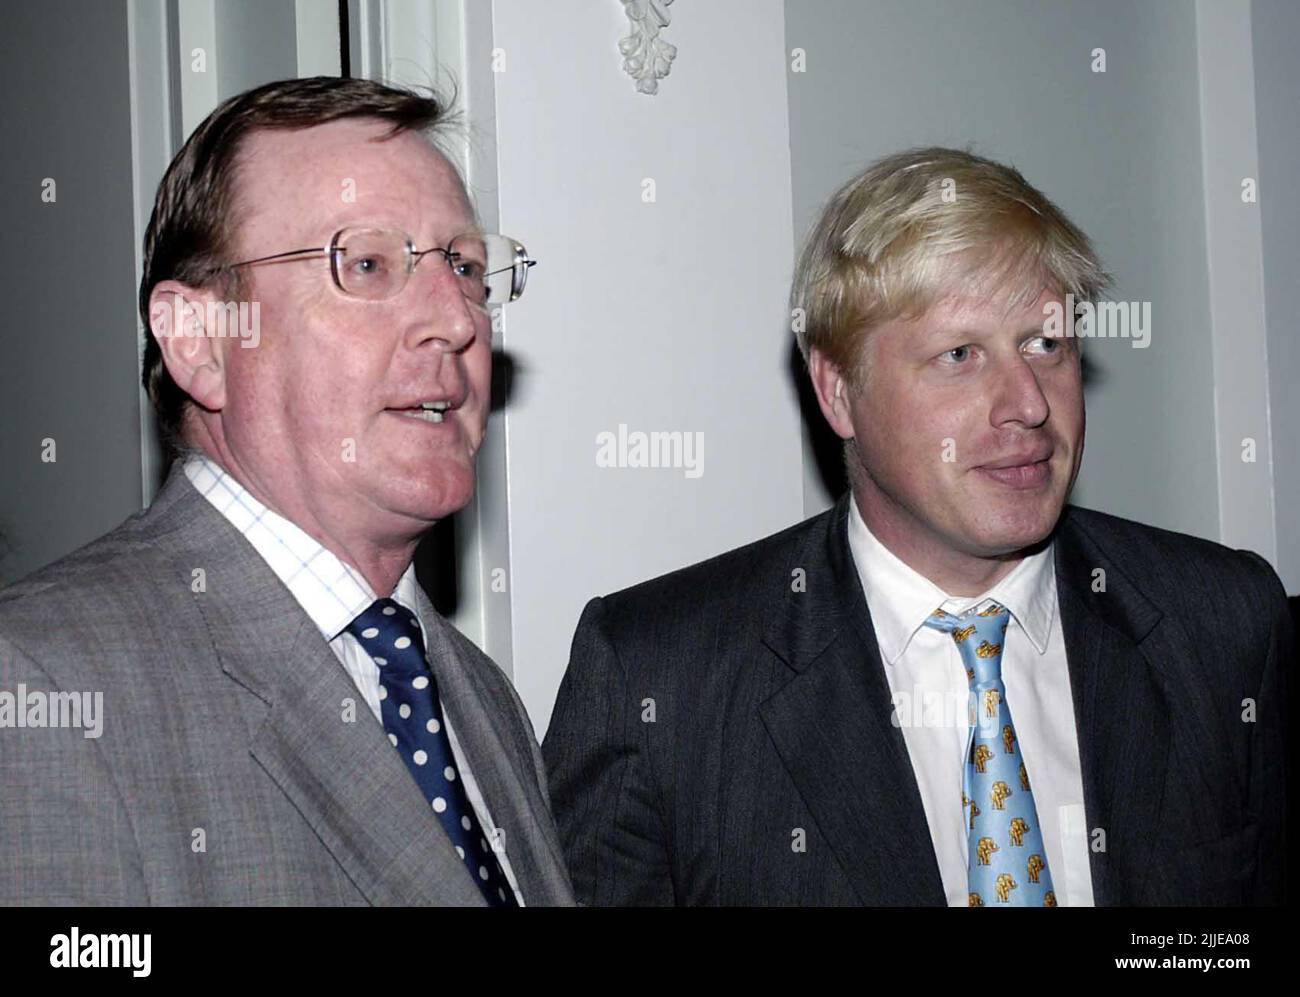 File photo dated 24/9/2003 of Ulster Unionist leader David Trimble (left) and Boris Johnson, editor of The Spectator magazine at a party to mark The Spectator's 175th anniversary, at the Four Seasons Hotel, Park Lane, London. The former Northern Ireland first minister has died, the Ulster Unionist Party has announced. Issue date: Monday July 25, 2022. Stock Photo